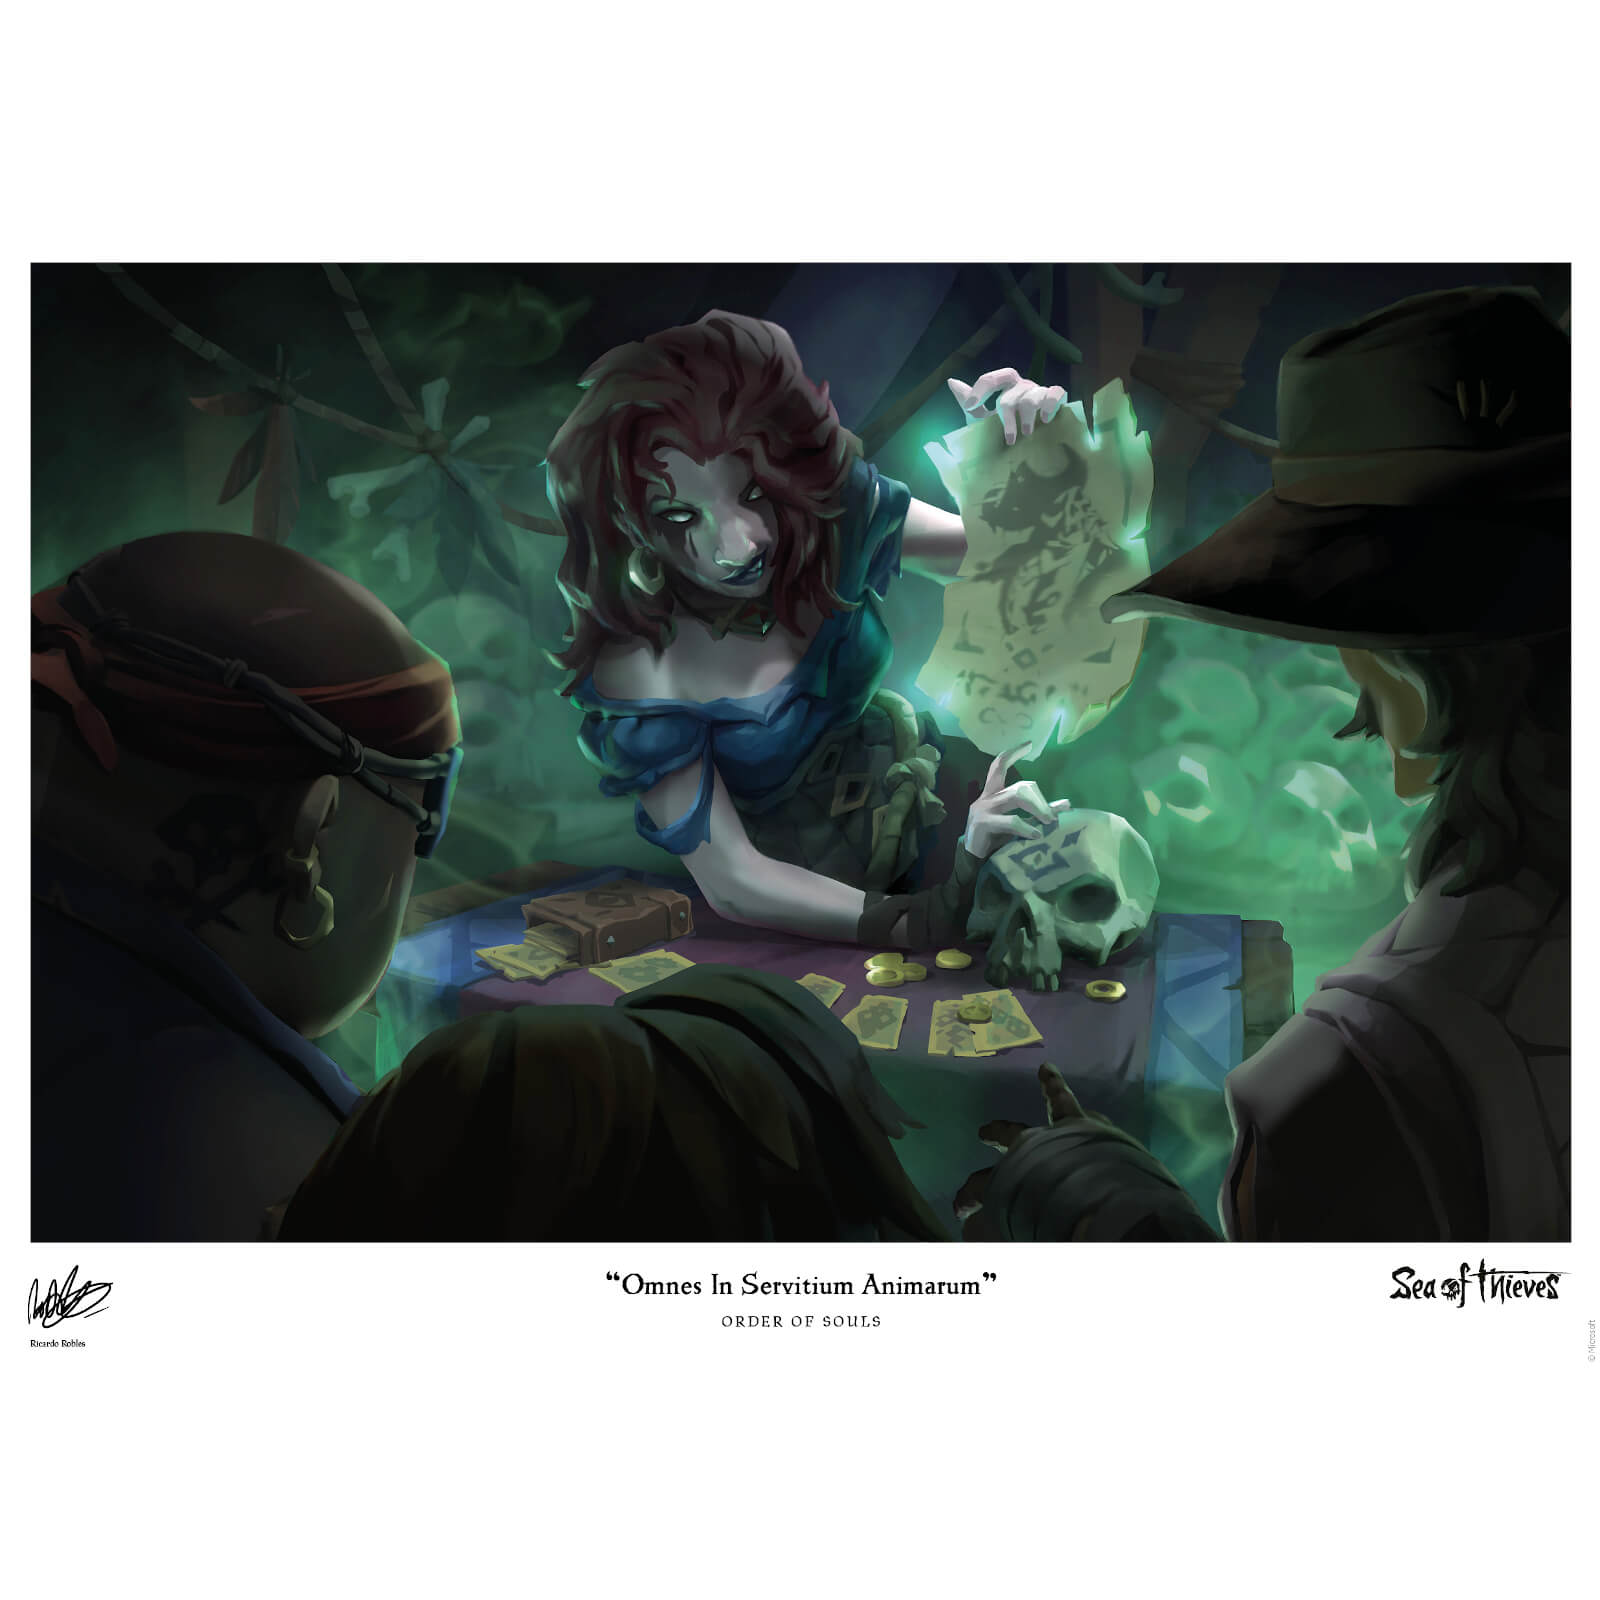 Sea of Thieves Limited Edition Art Print - Order of Souls